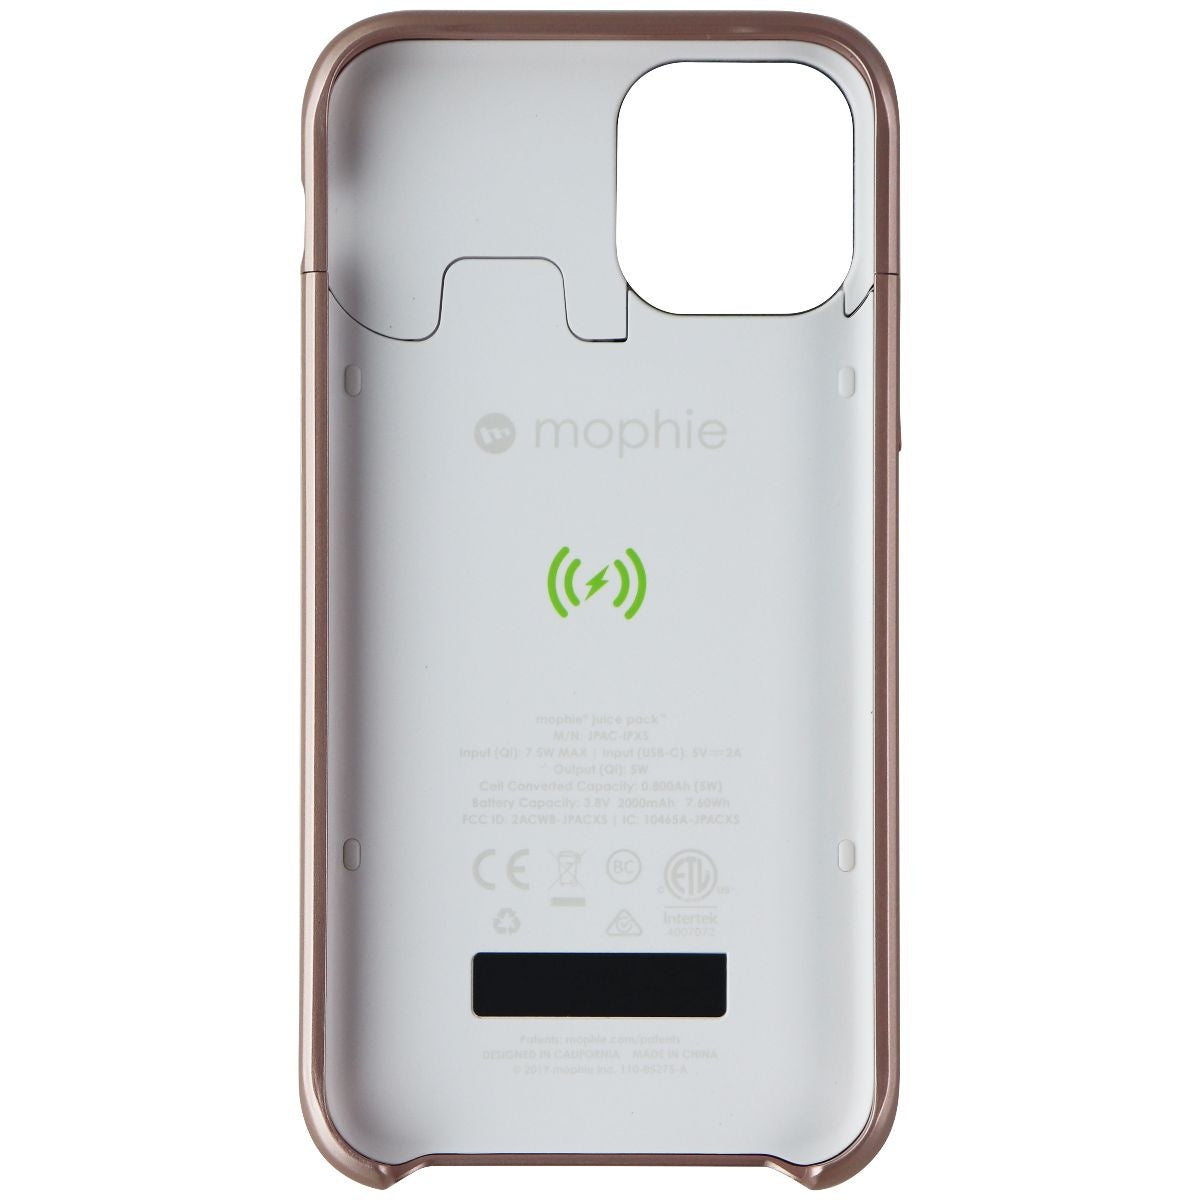 mophie Juice Pack Access 2000 mAh Battery Case for iPhone 11 Pro - Pink